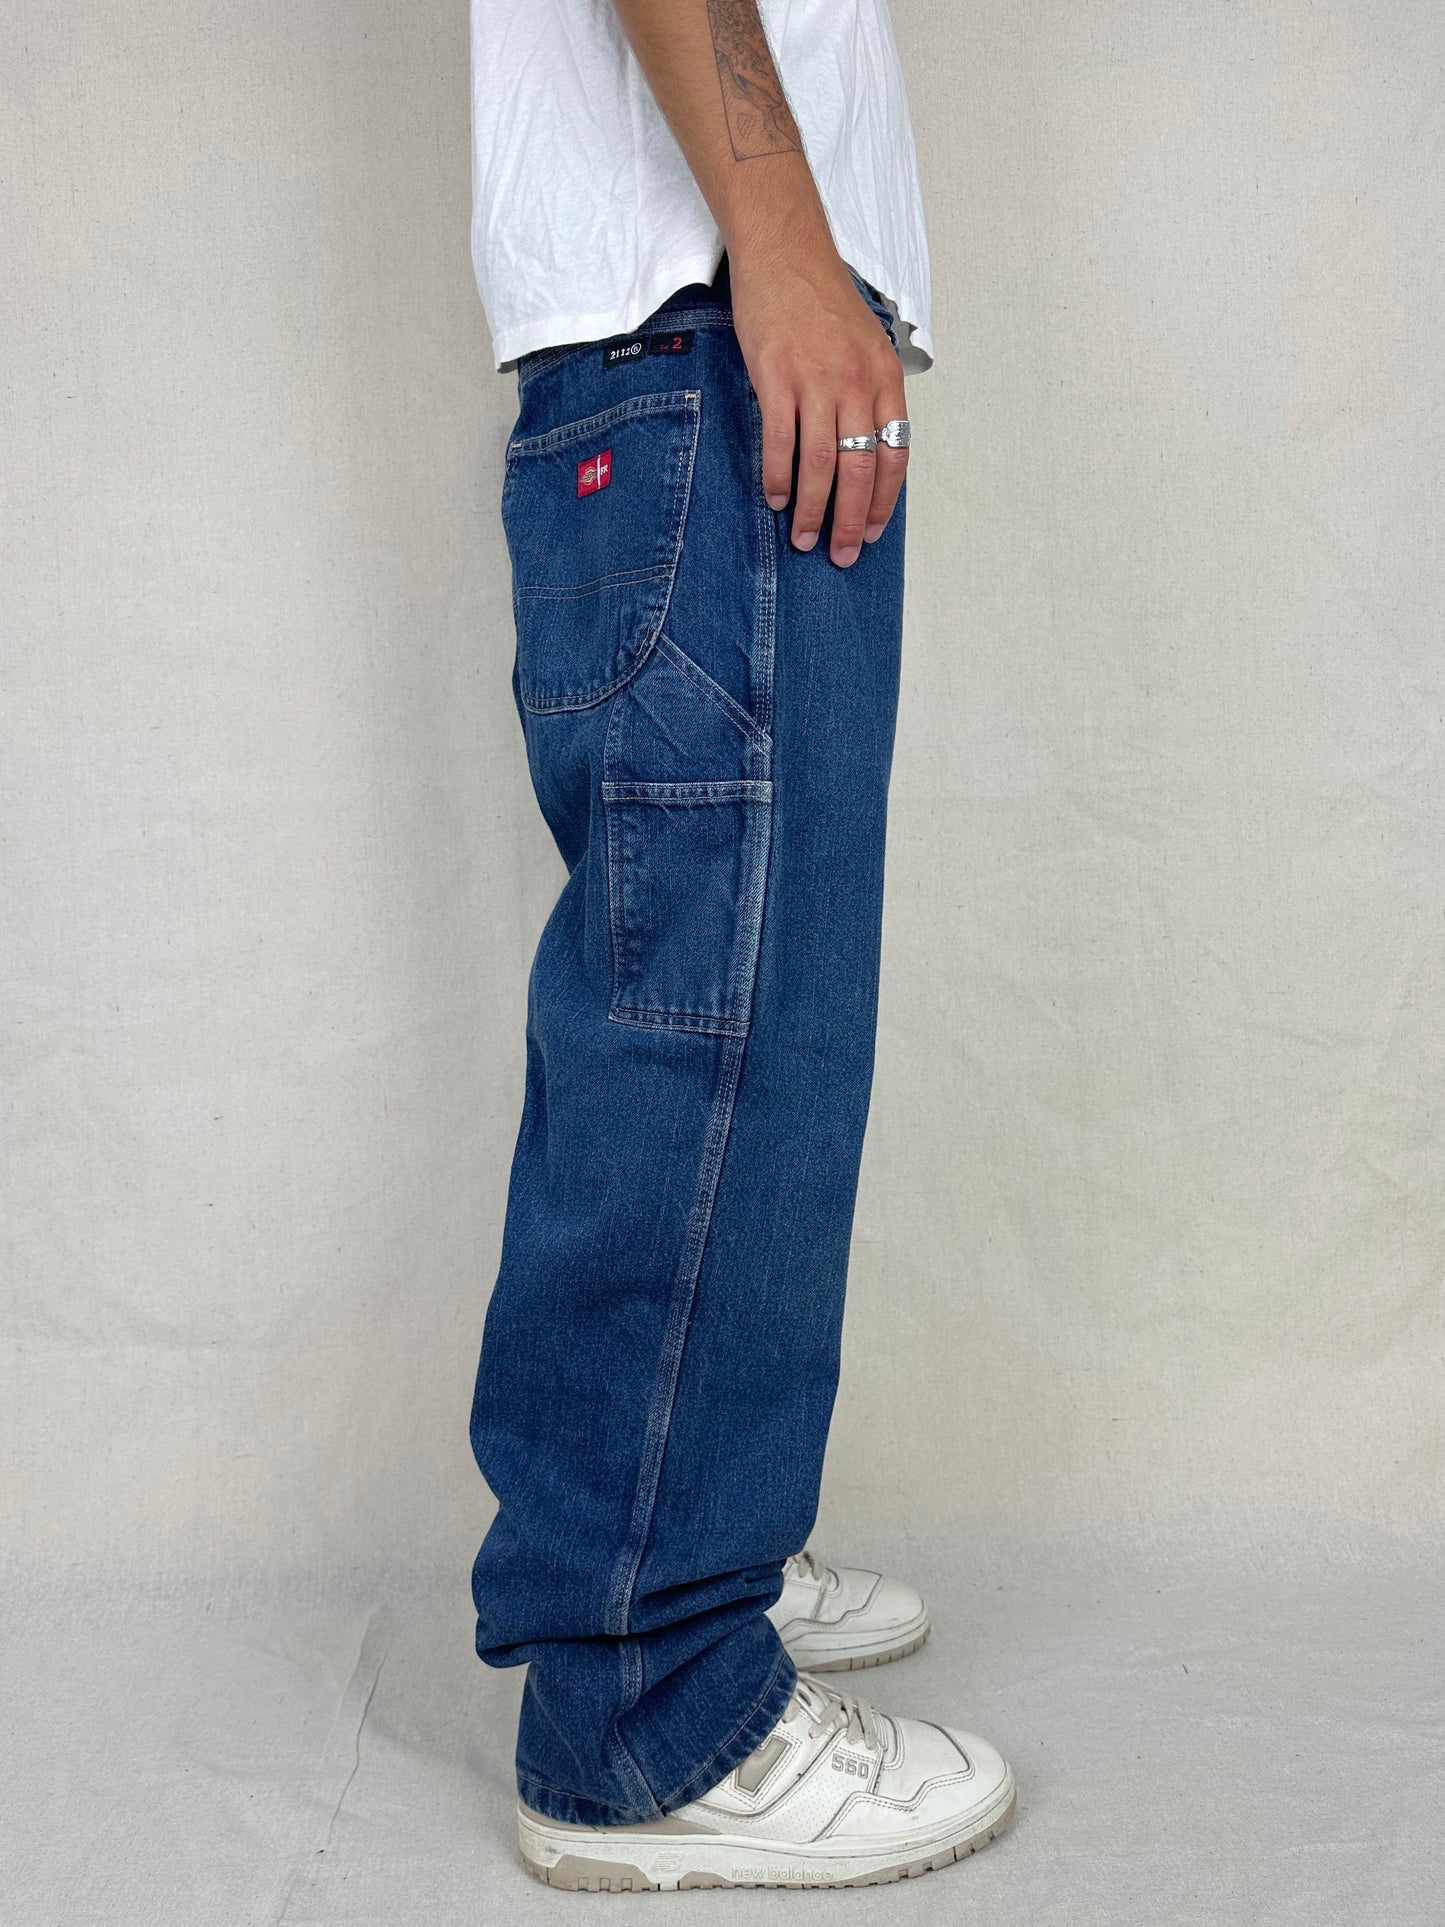 90's Dickies Heavy Duty Vintage Carpenter Jeans Size 37x34